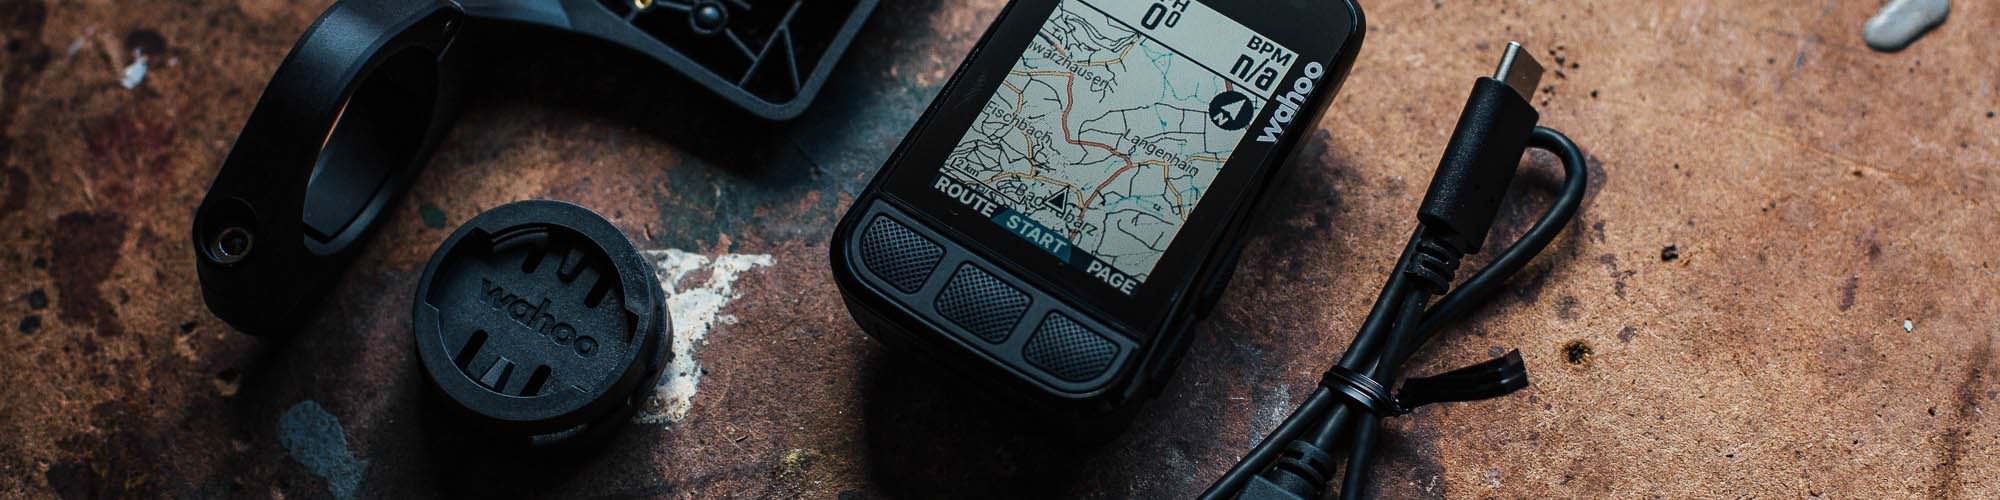 Brand new Wahoo ELEMNT BOLT 2.0 – First ride review of the new GPS